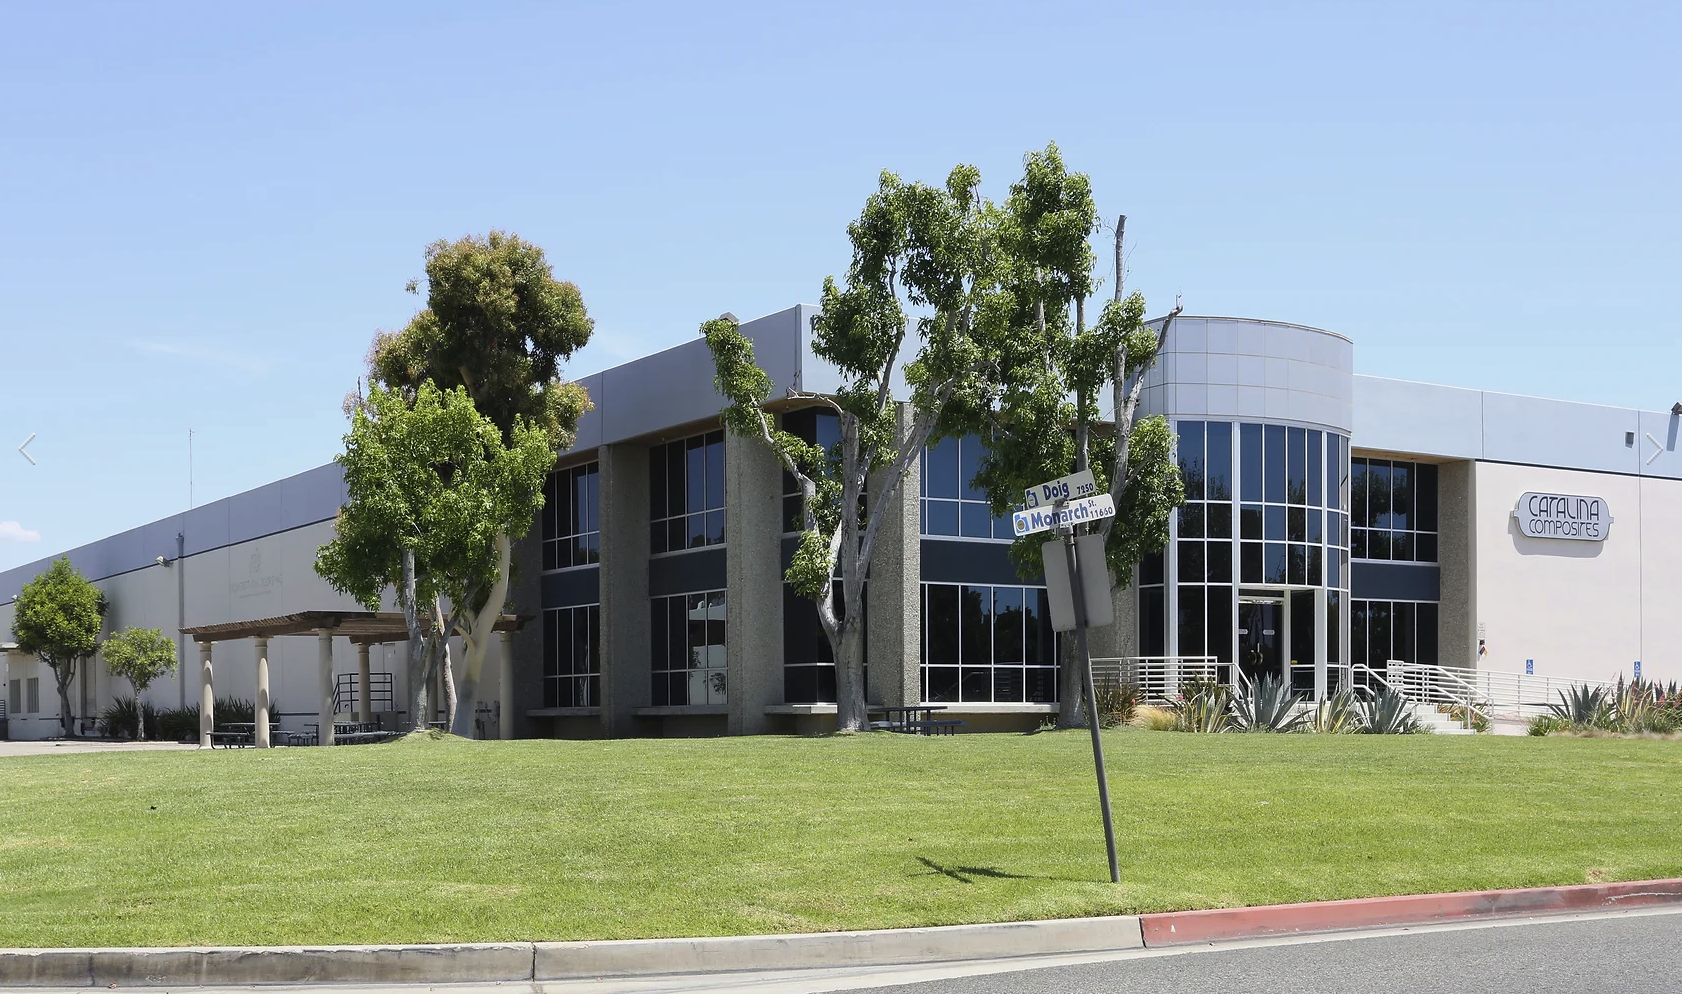 Industrial Property Sale, Owner-User Purchase, Commercial Real Estate Transaction, Class A Facility, Heavy Power and Rail Service, Aluminum Precision Products, Catalina Cylinders, Garden Grove Property, Maniaci Family Trust, $12,850,000 Sale